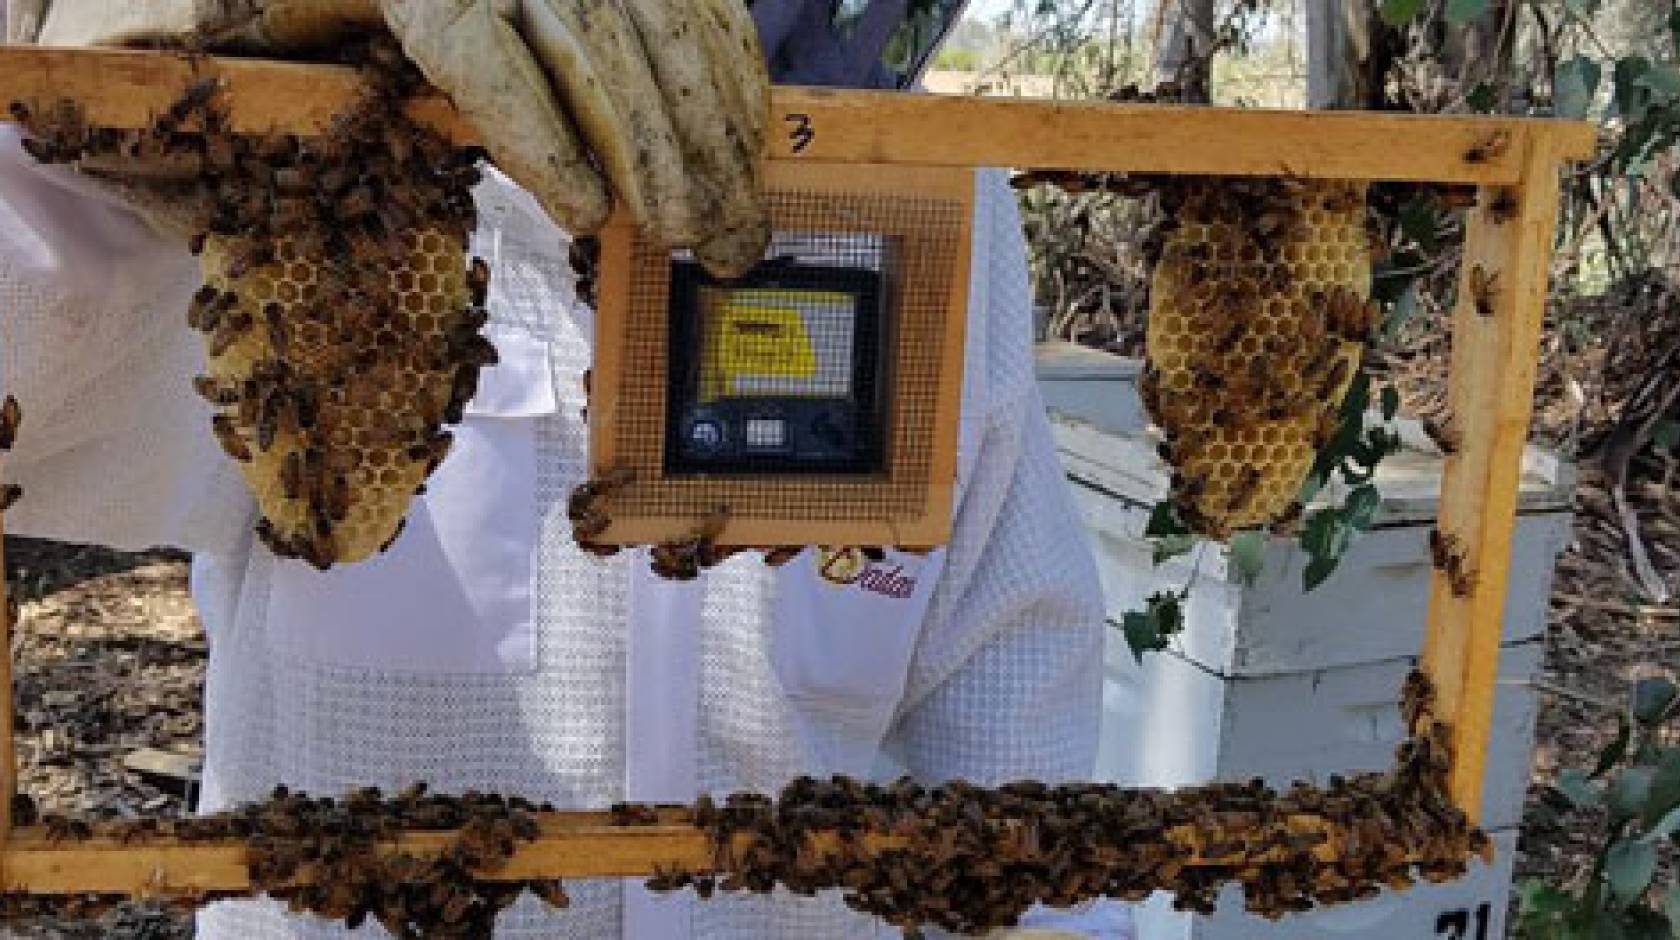 Physics for beekeepers: mold in a beehive - Honey Bee Suite